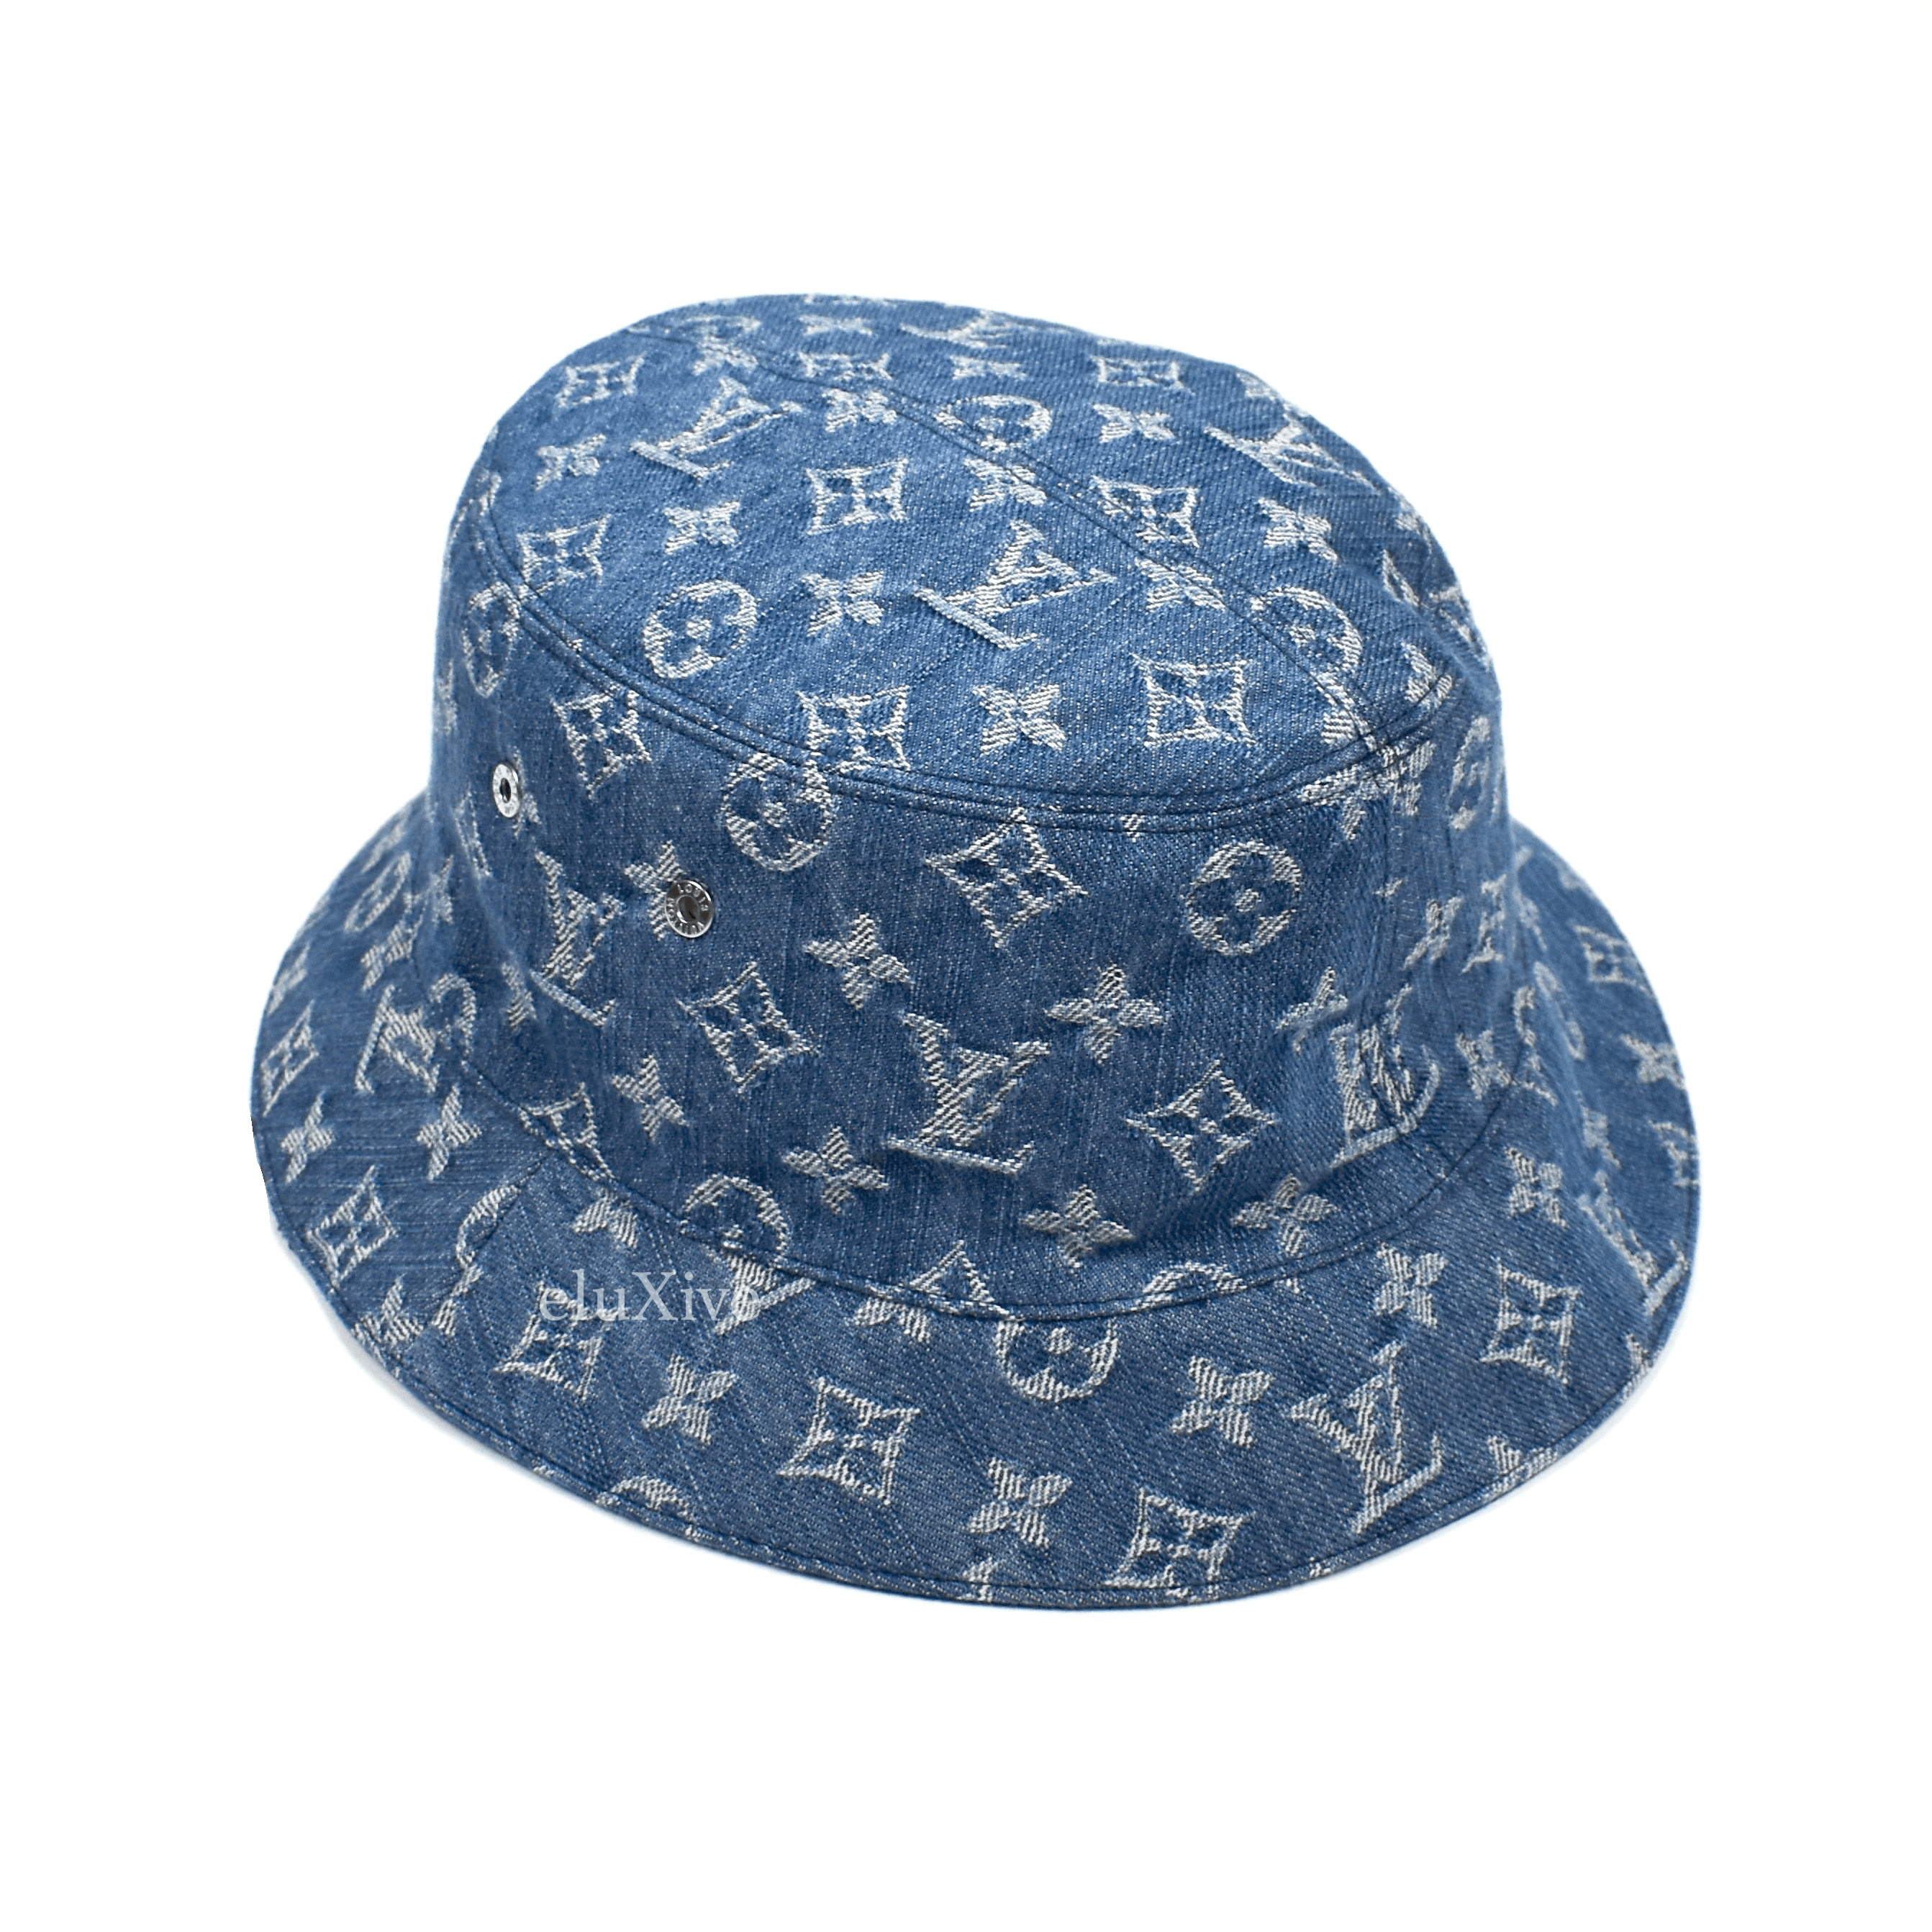 NWT Louis Vuitton Floral Tapestry Monogram Woven Bucket Hat Virgil